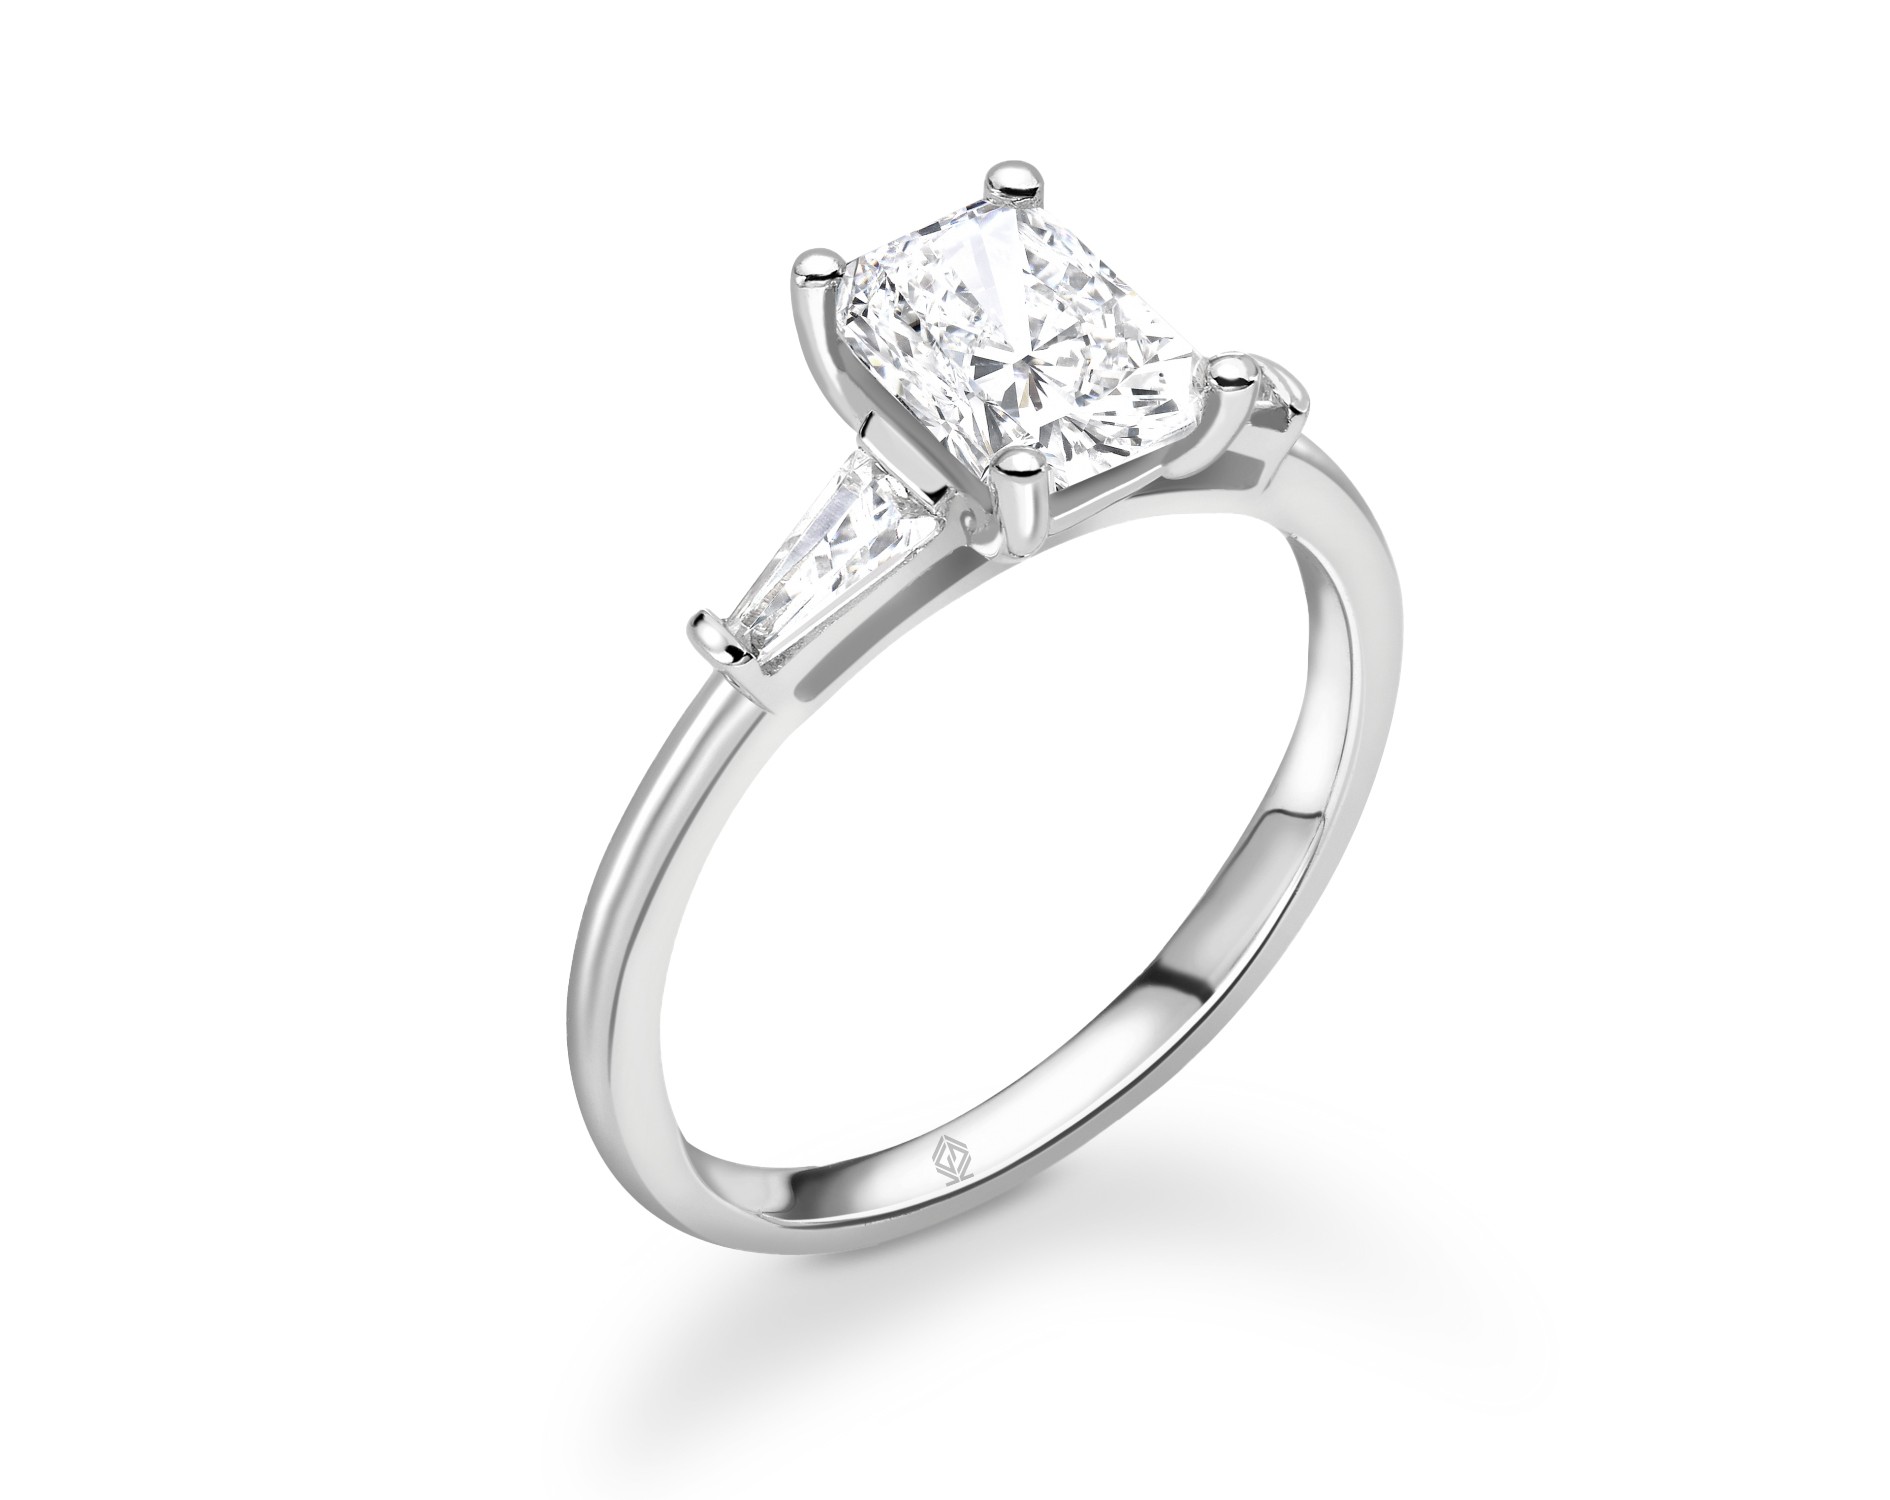 18K WHITE GOLD CUSHION CUT DIAMOND ENGAGEMENT RING WITH BAGUETTES CUT SIDE STONES